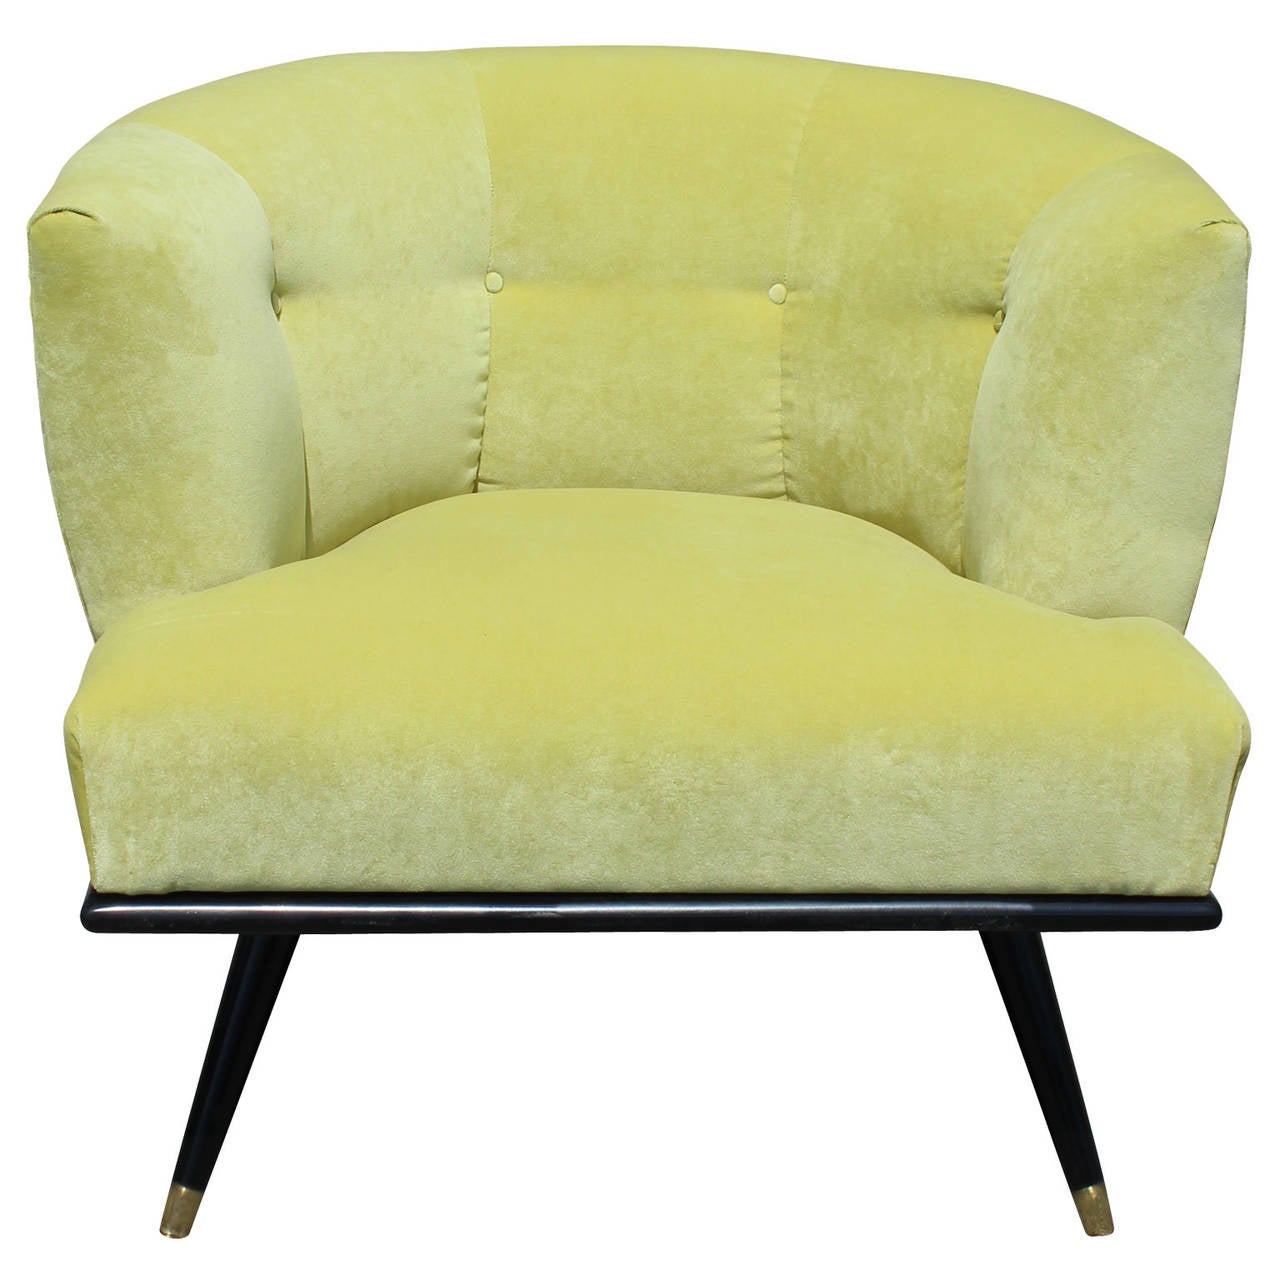 Wonderful side armchair freshly upholstered in a lime or chartreuse velvet. A glossy black lacquered base contrasts the upholstery. Brass caps accent the tapered legs.